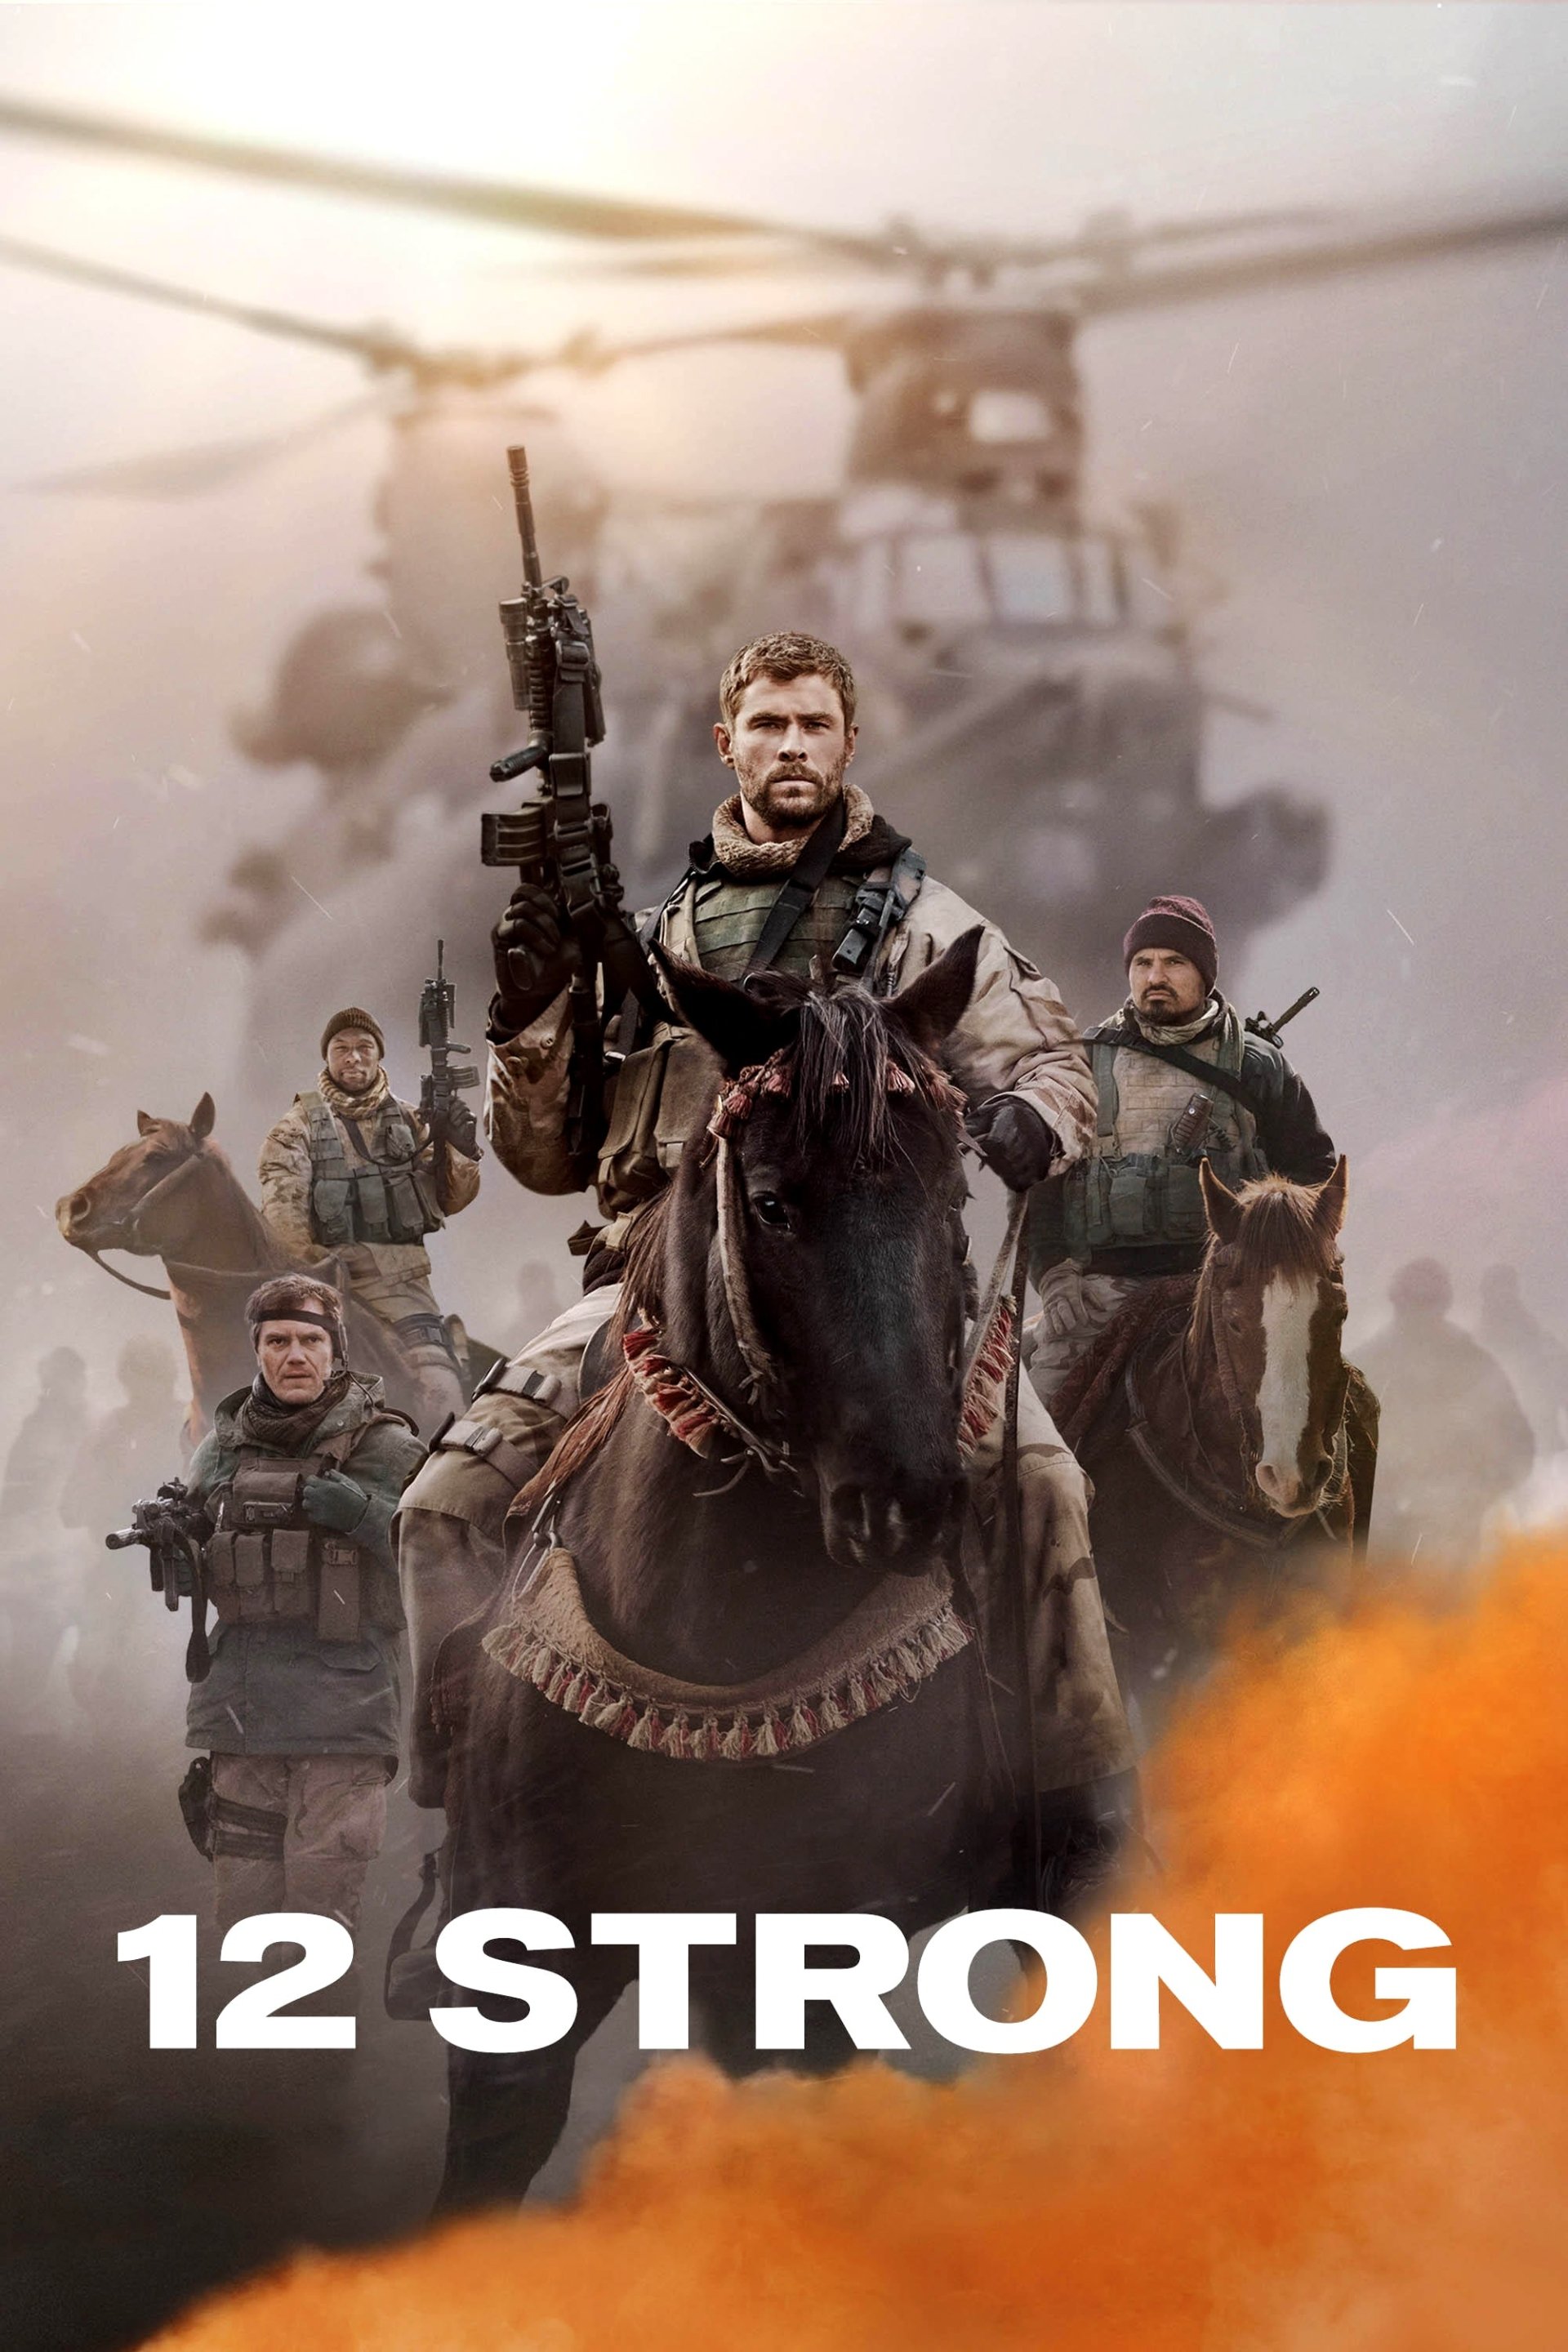 12 Strong - Desktop Wallpapers, Phone Wallpaper, PFP, Gifs, and More!